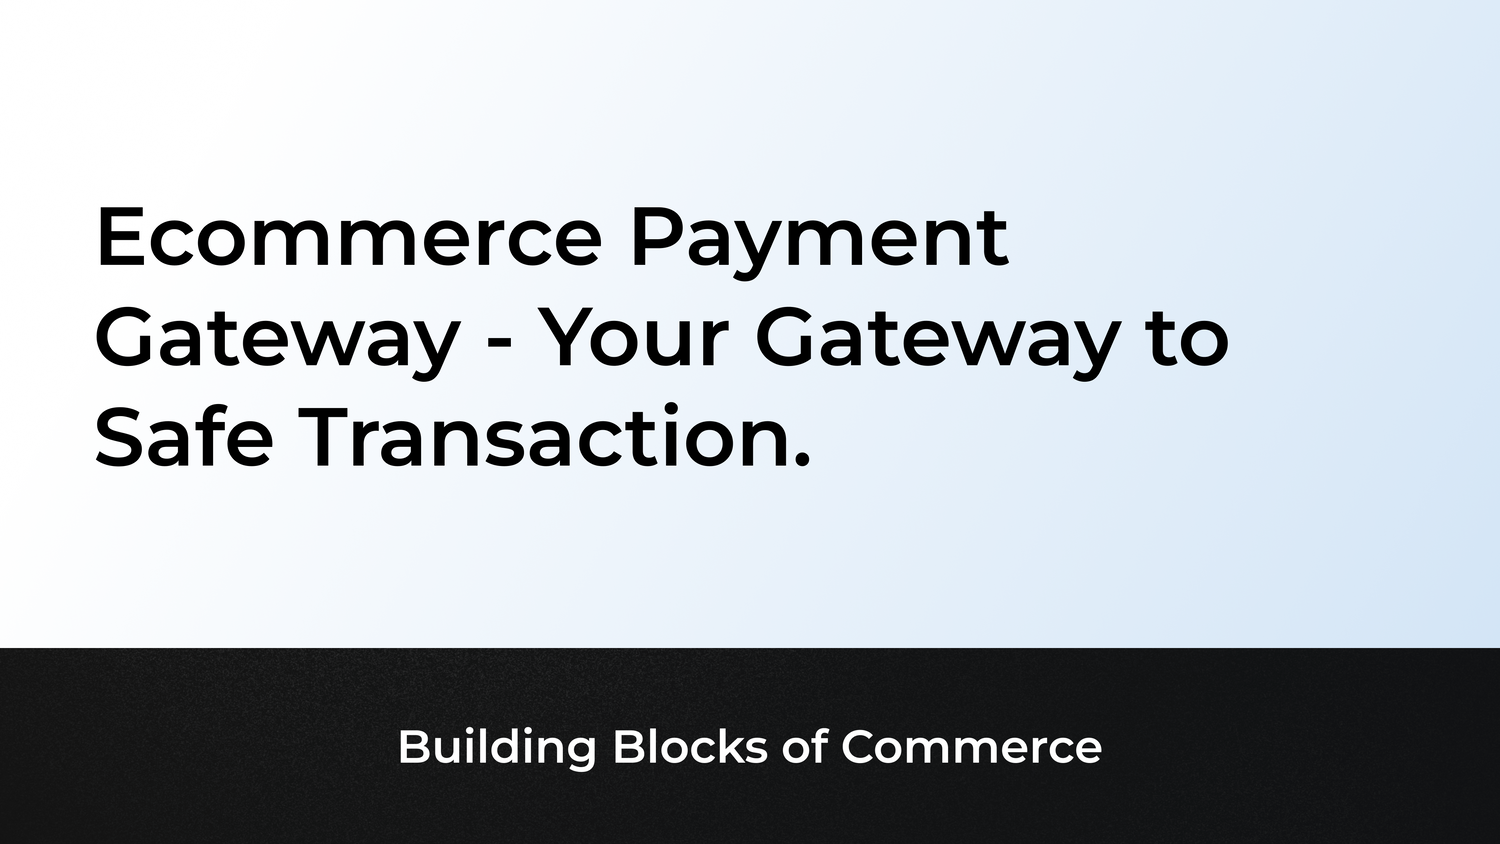 Ecommerce Payment Gateway - Your Gateway to Safe Transactions